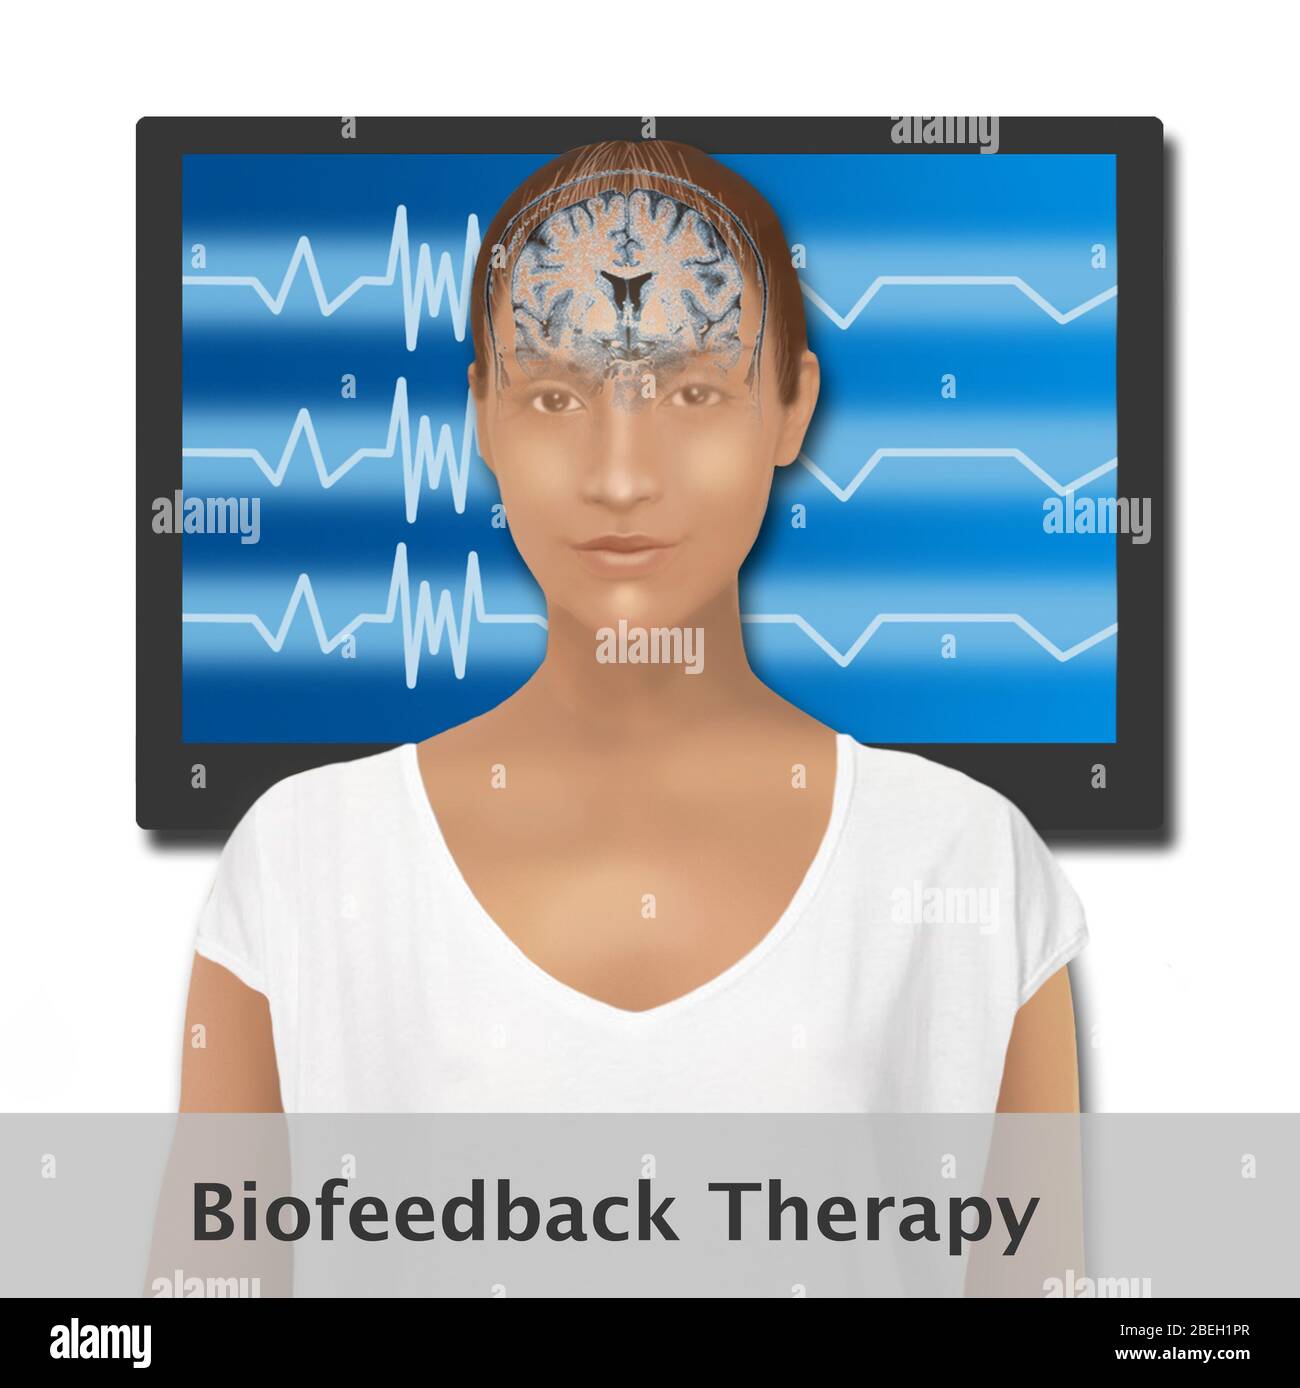 Illustration of biofeedback therapy. Biofeedback is sometimes used to improve health, performance, and the physiological changes that often occur in conjunction with changes to thoughts, emotions, and behavior. Observation of the brains reactions to different situations assists patients with controlling these reactions. Stock Photo